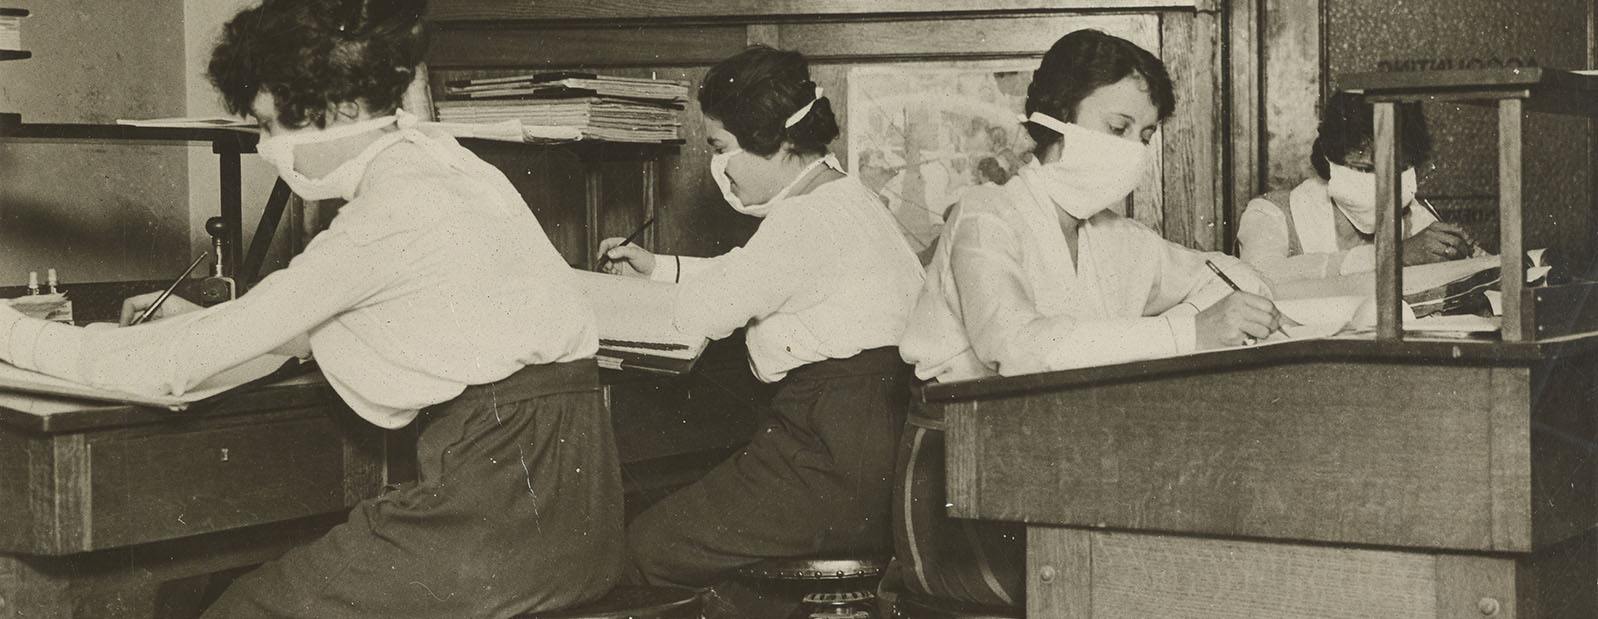 Girl clerks in New York at work with masks carefully tied about their faces.